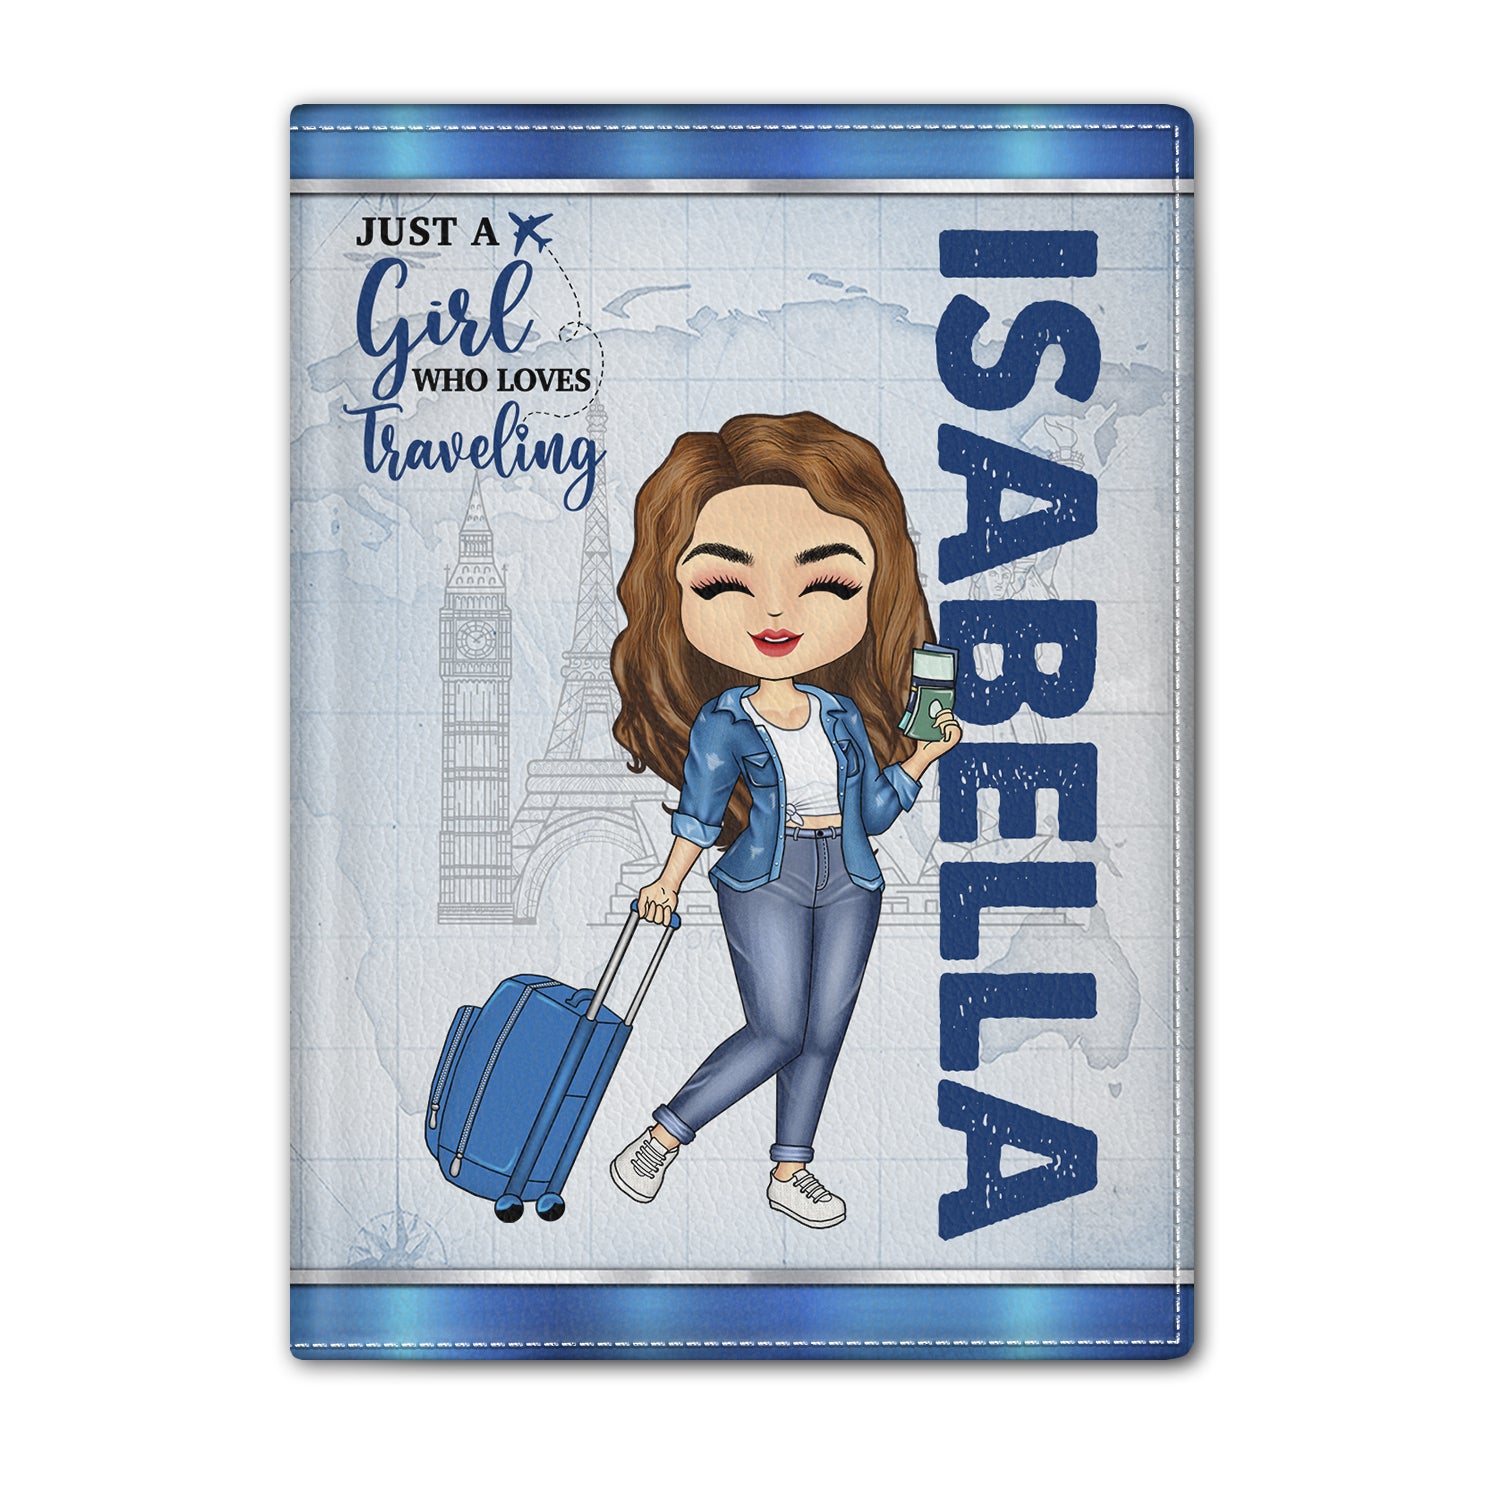 Just A Girl Boy Who Loves Traveling - Birthday Gift For Him, Her, Family, Trippin', Vacation Lovers - Personalized Custom Passport Cover, Passport Holder